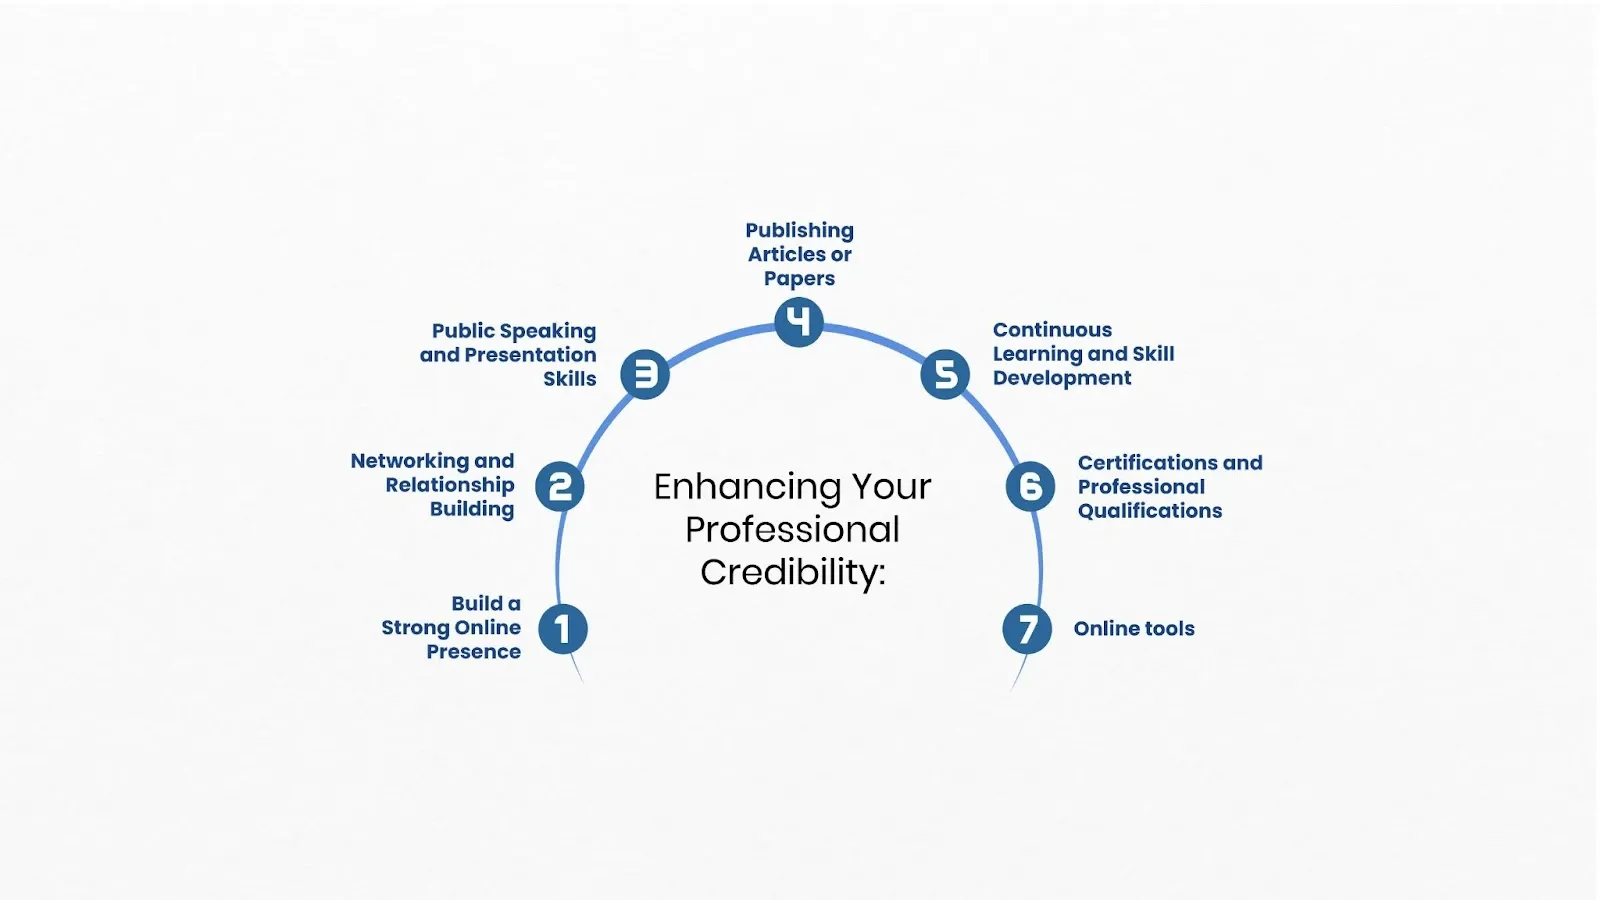 image representing how to enhance professional credibility